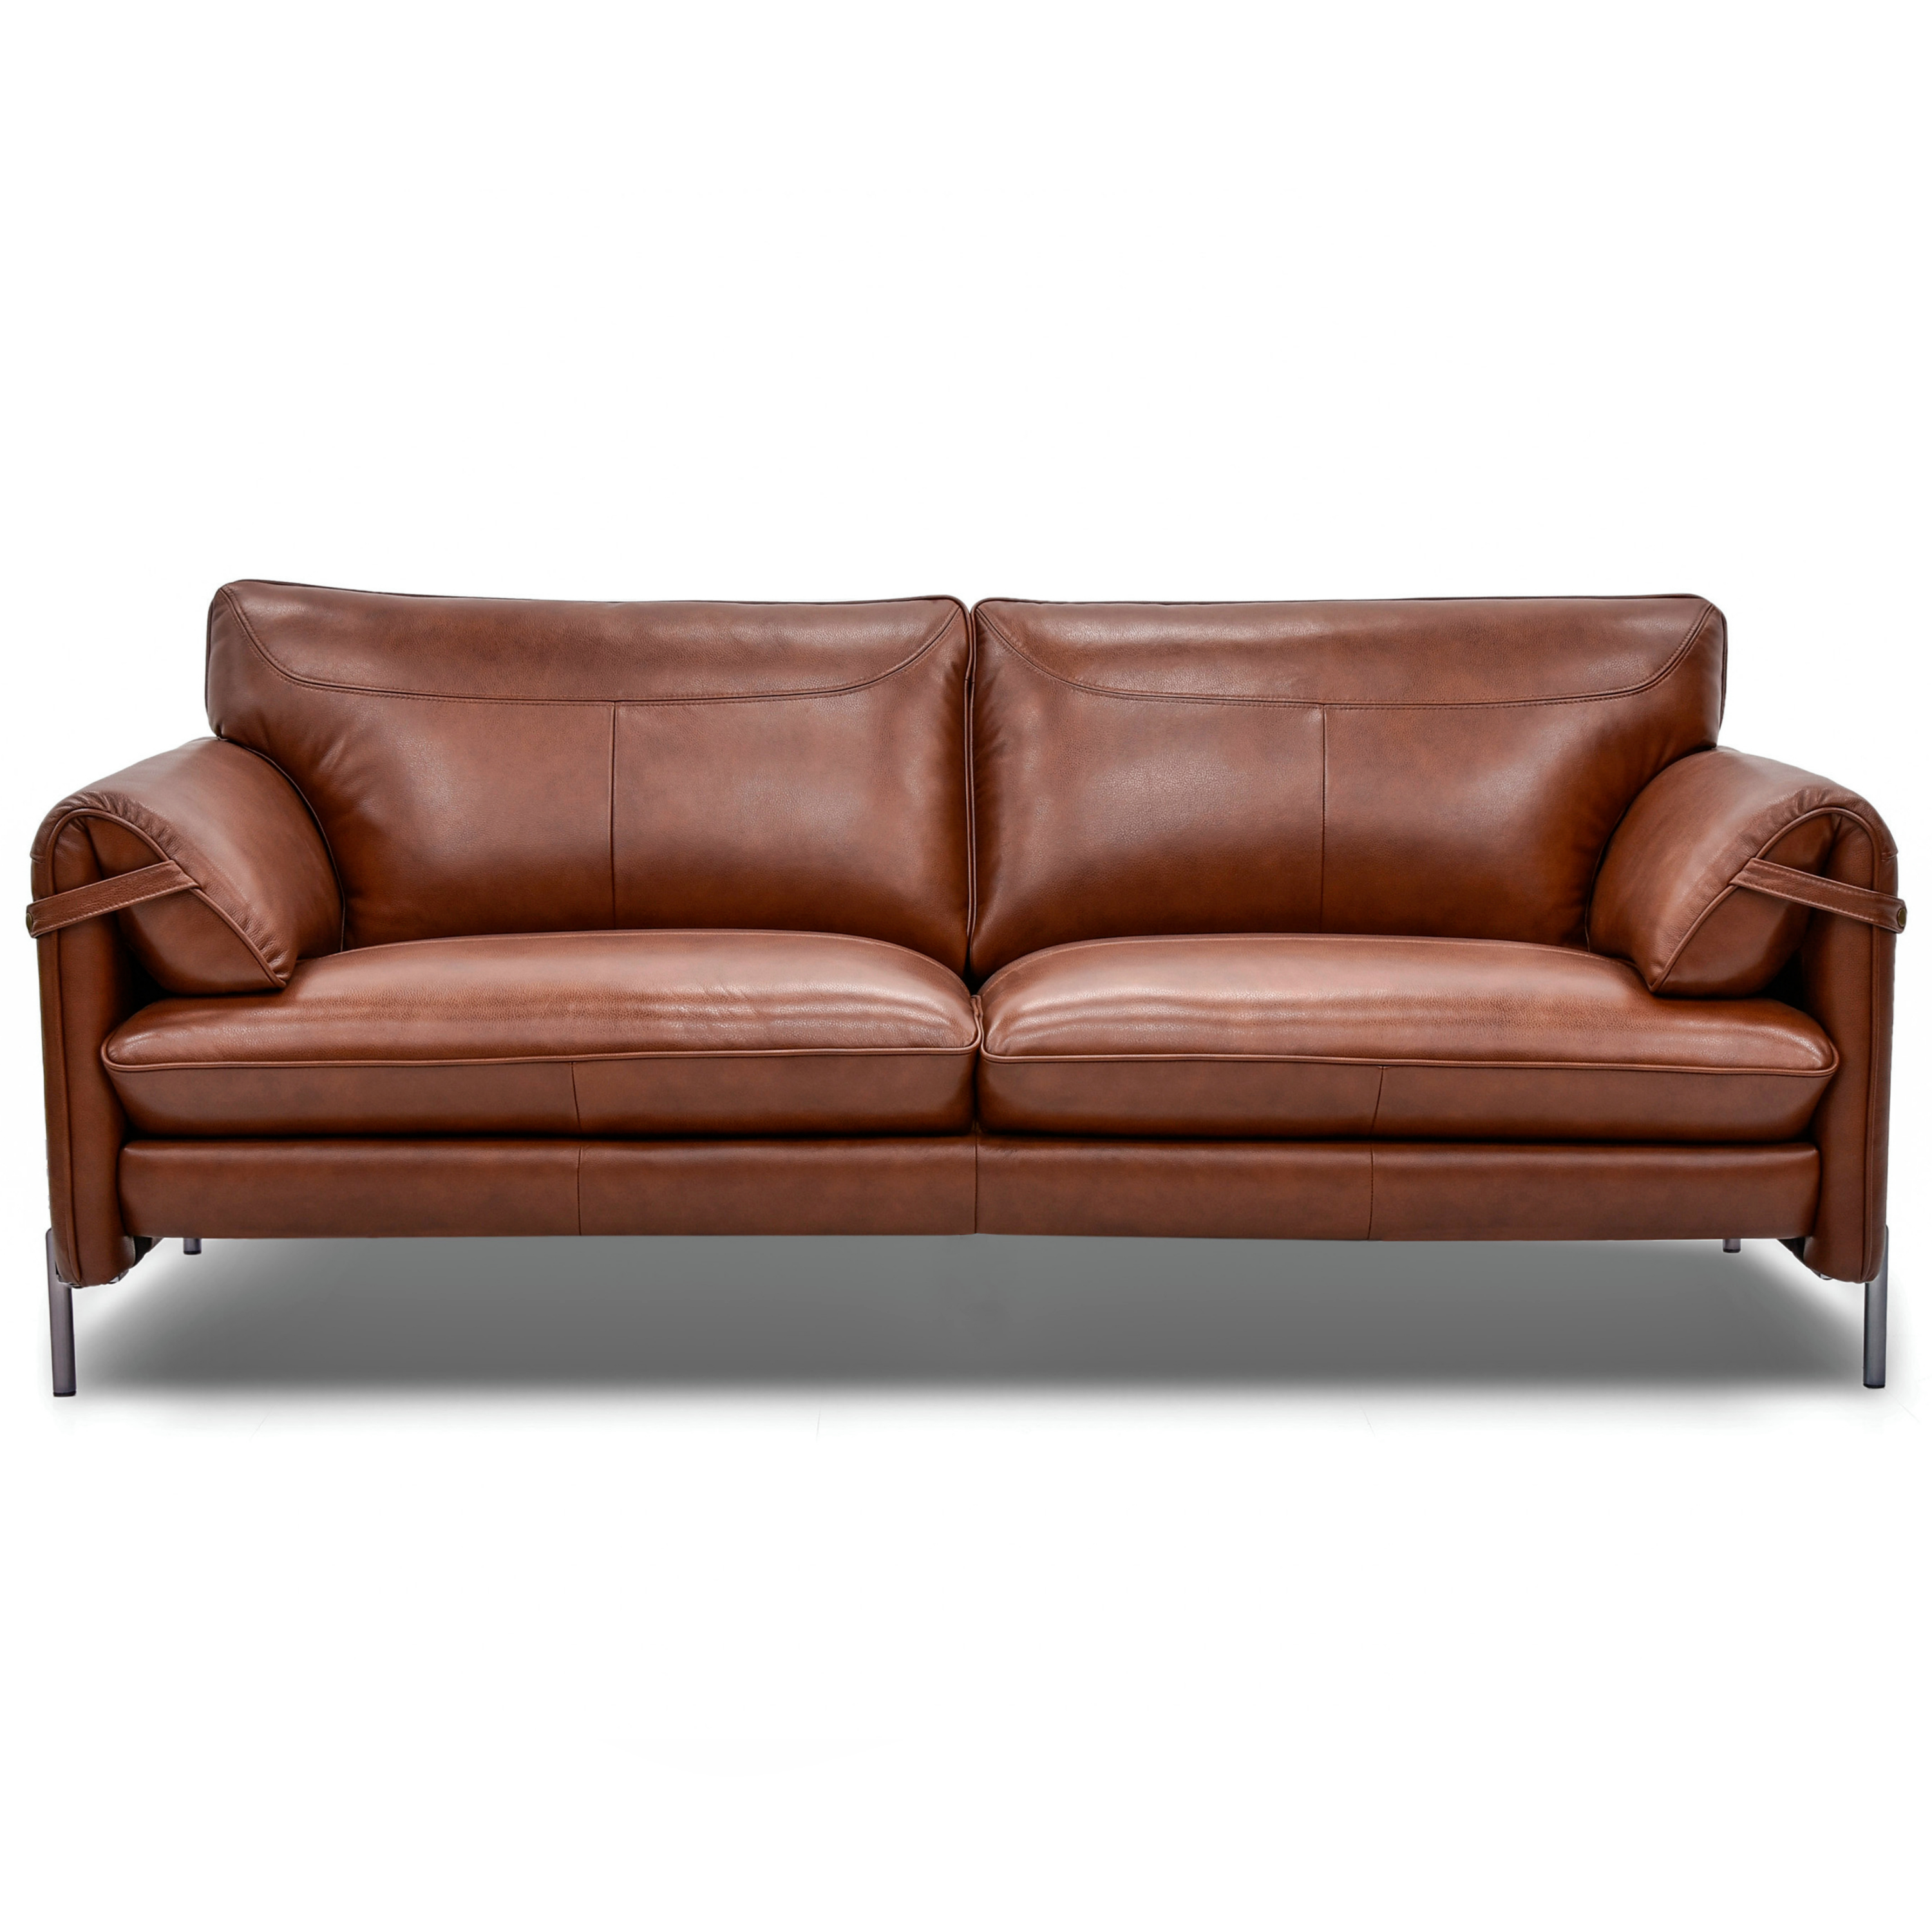 Full Leather Sofa 3487 Home Of Homes